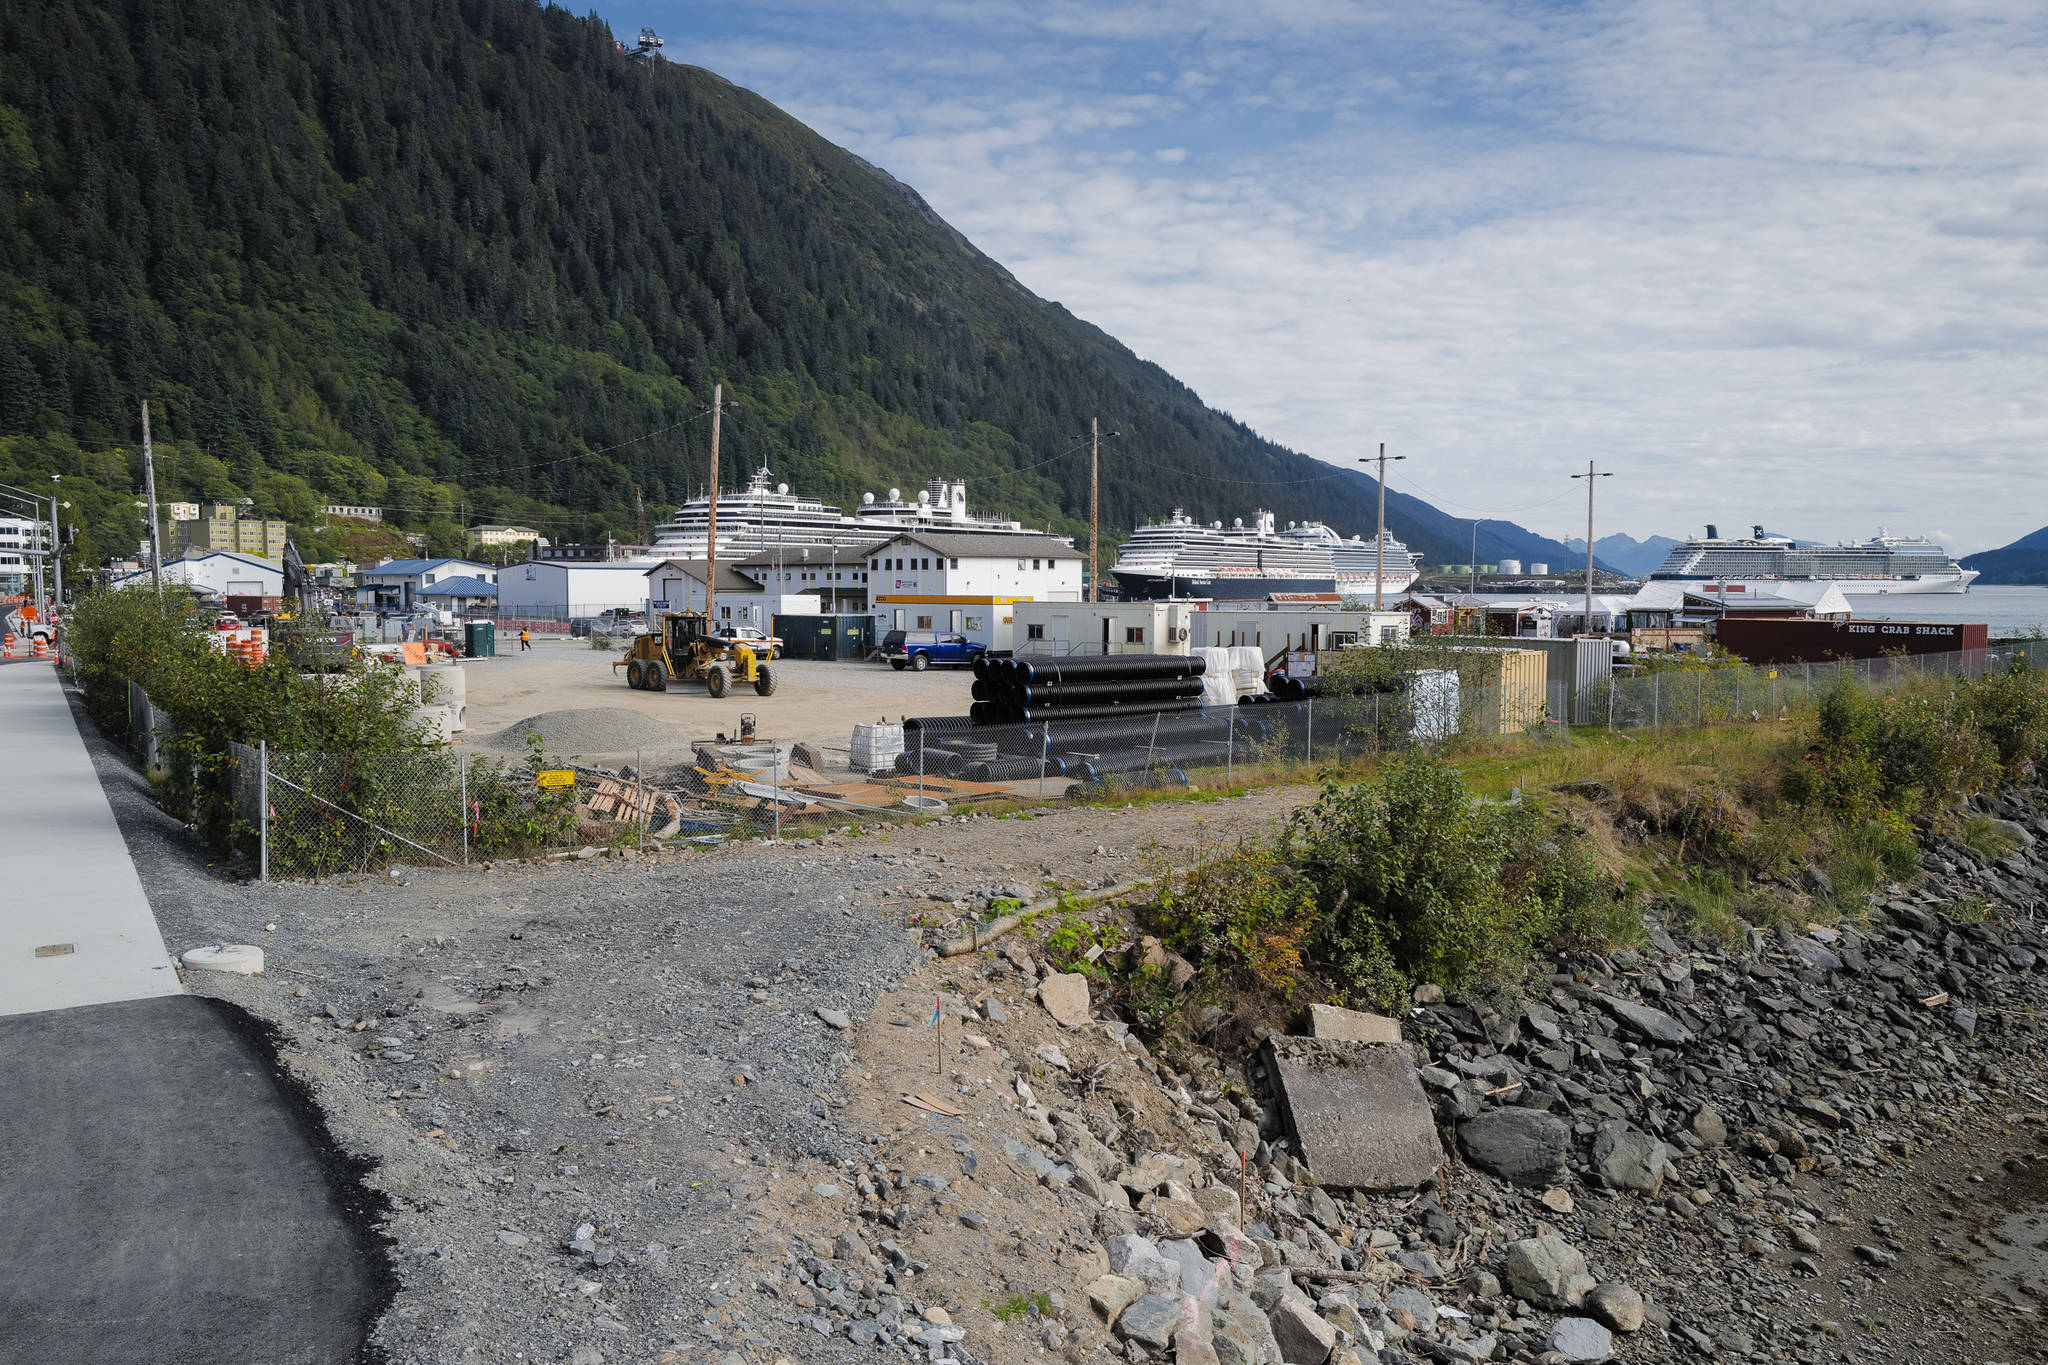 The Alaska Mental Health Trust Authority has sold its subport land along Egan Drive in downtown Juneau to NCL Bahamas Ltd., which does business as Norwegian Cruise Lines, for $20 million. Norwegian Cruise Lines has until Sept. 19 to fulfill all the requirements of the bidding process, which includes paying 10 percent of the purchase price. (Michael Penn | Juneau Empire)